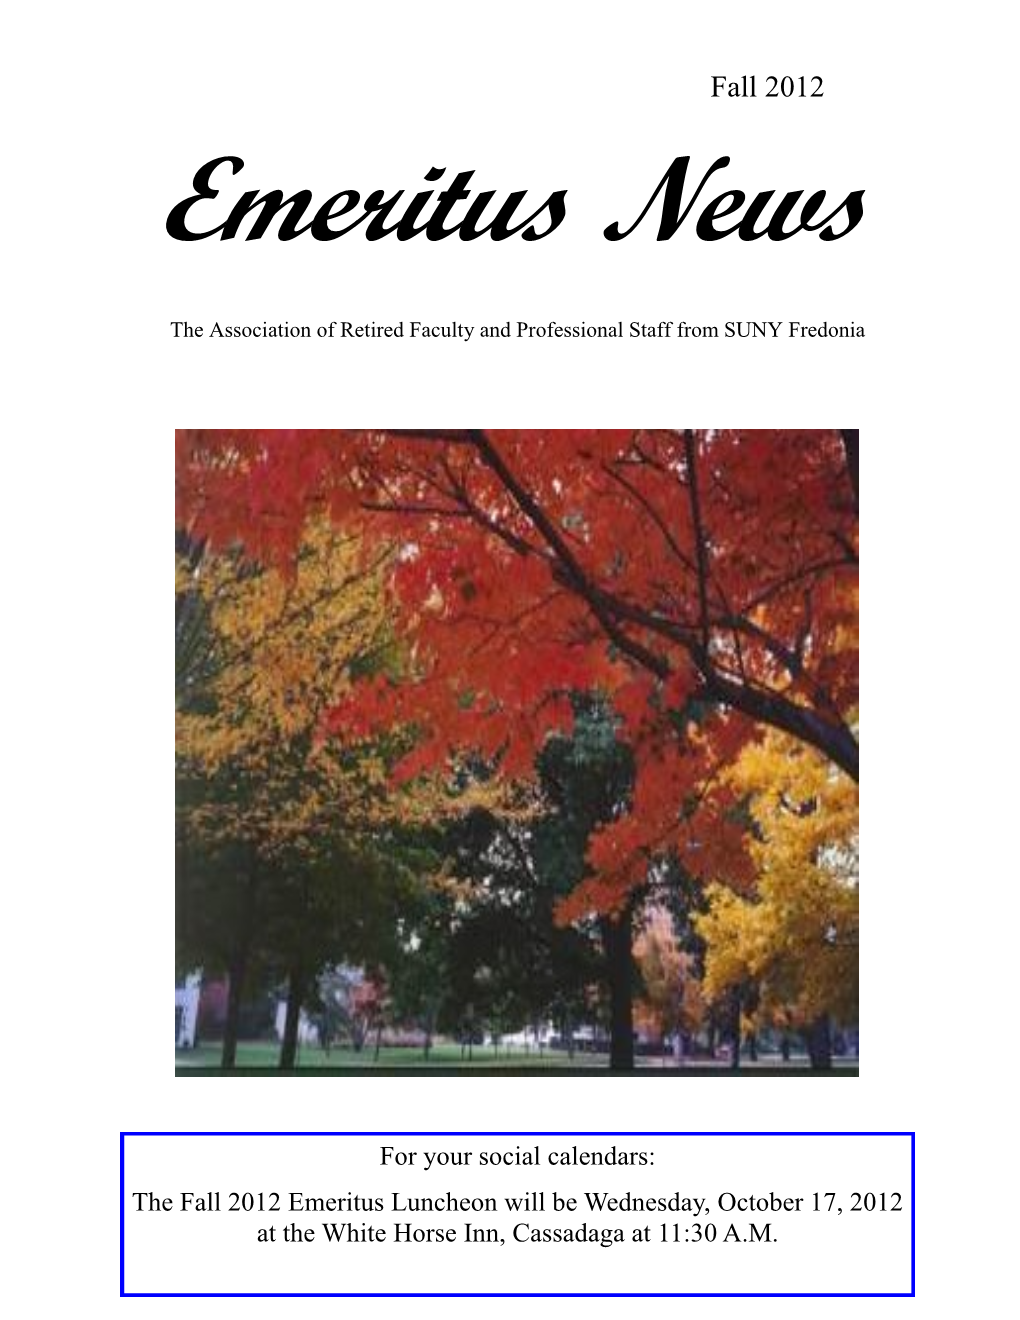 PDF of the Fall 2012 Newsletter